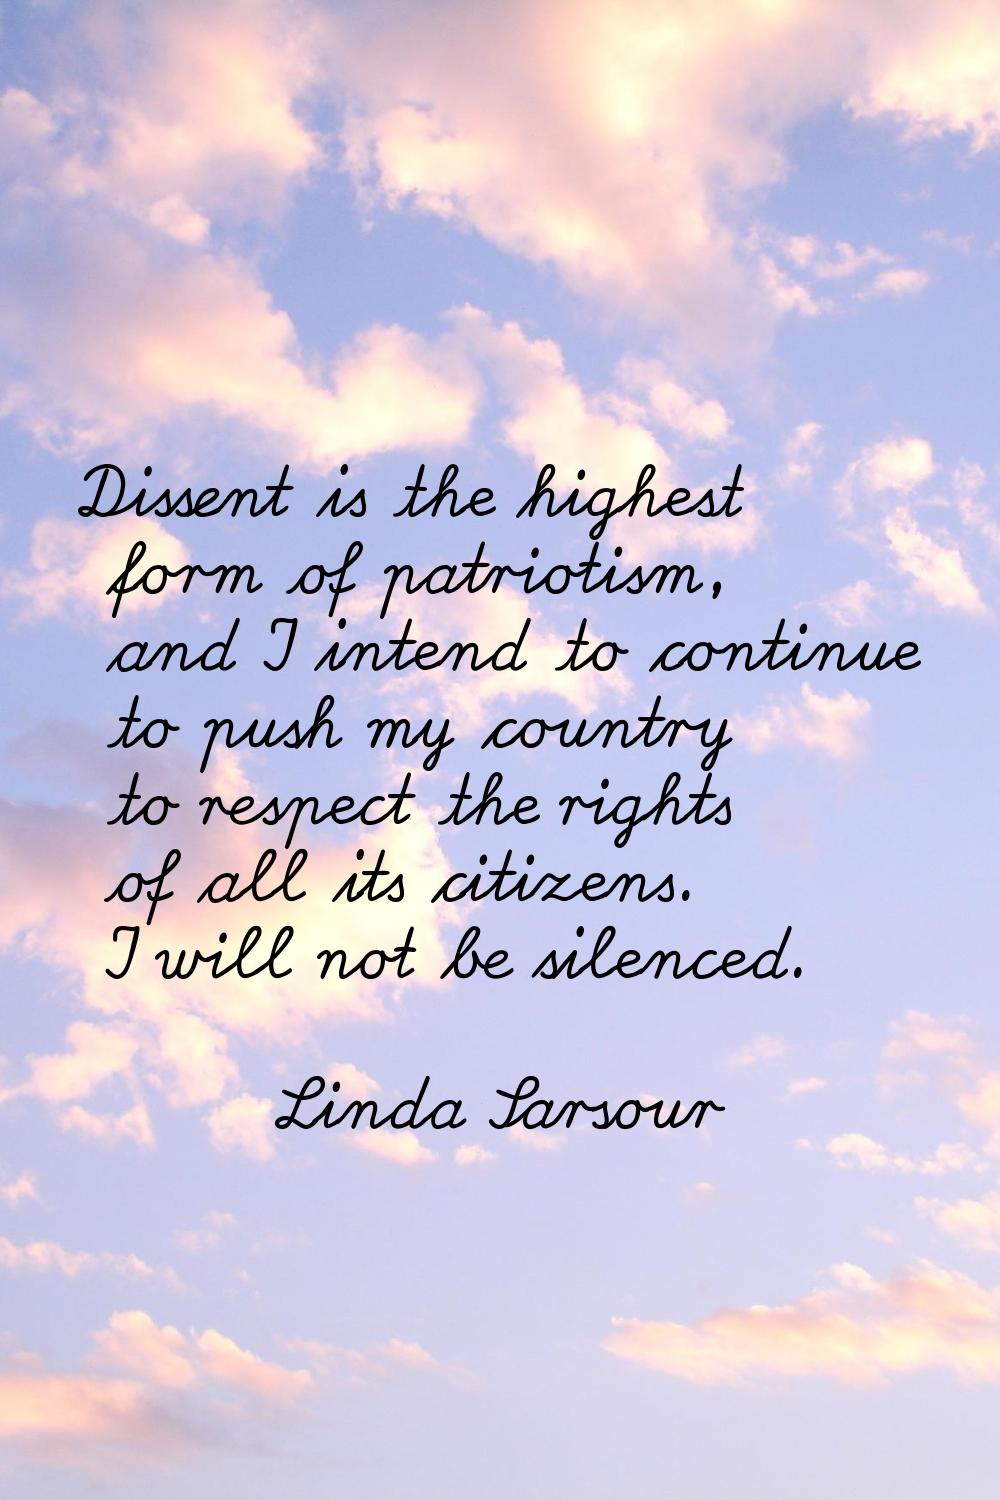 Dissent is the highest form of patriotism, and I intend to continue to push my country to respect t